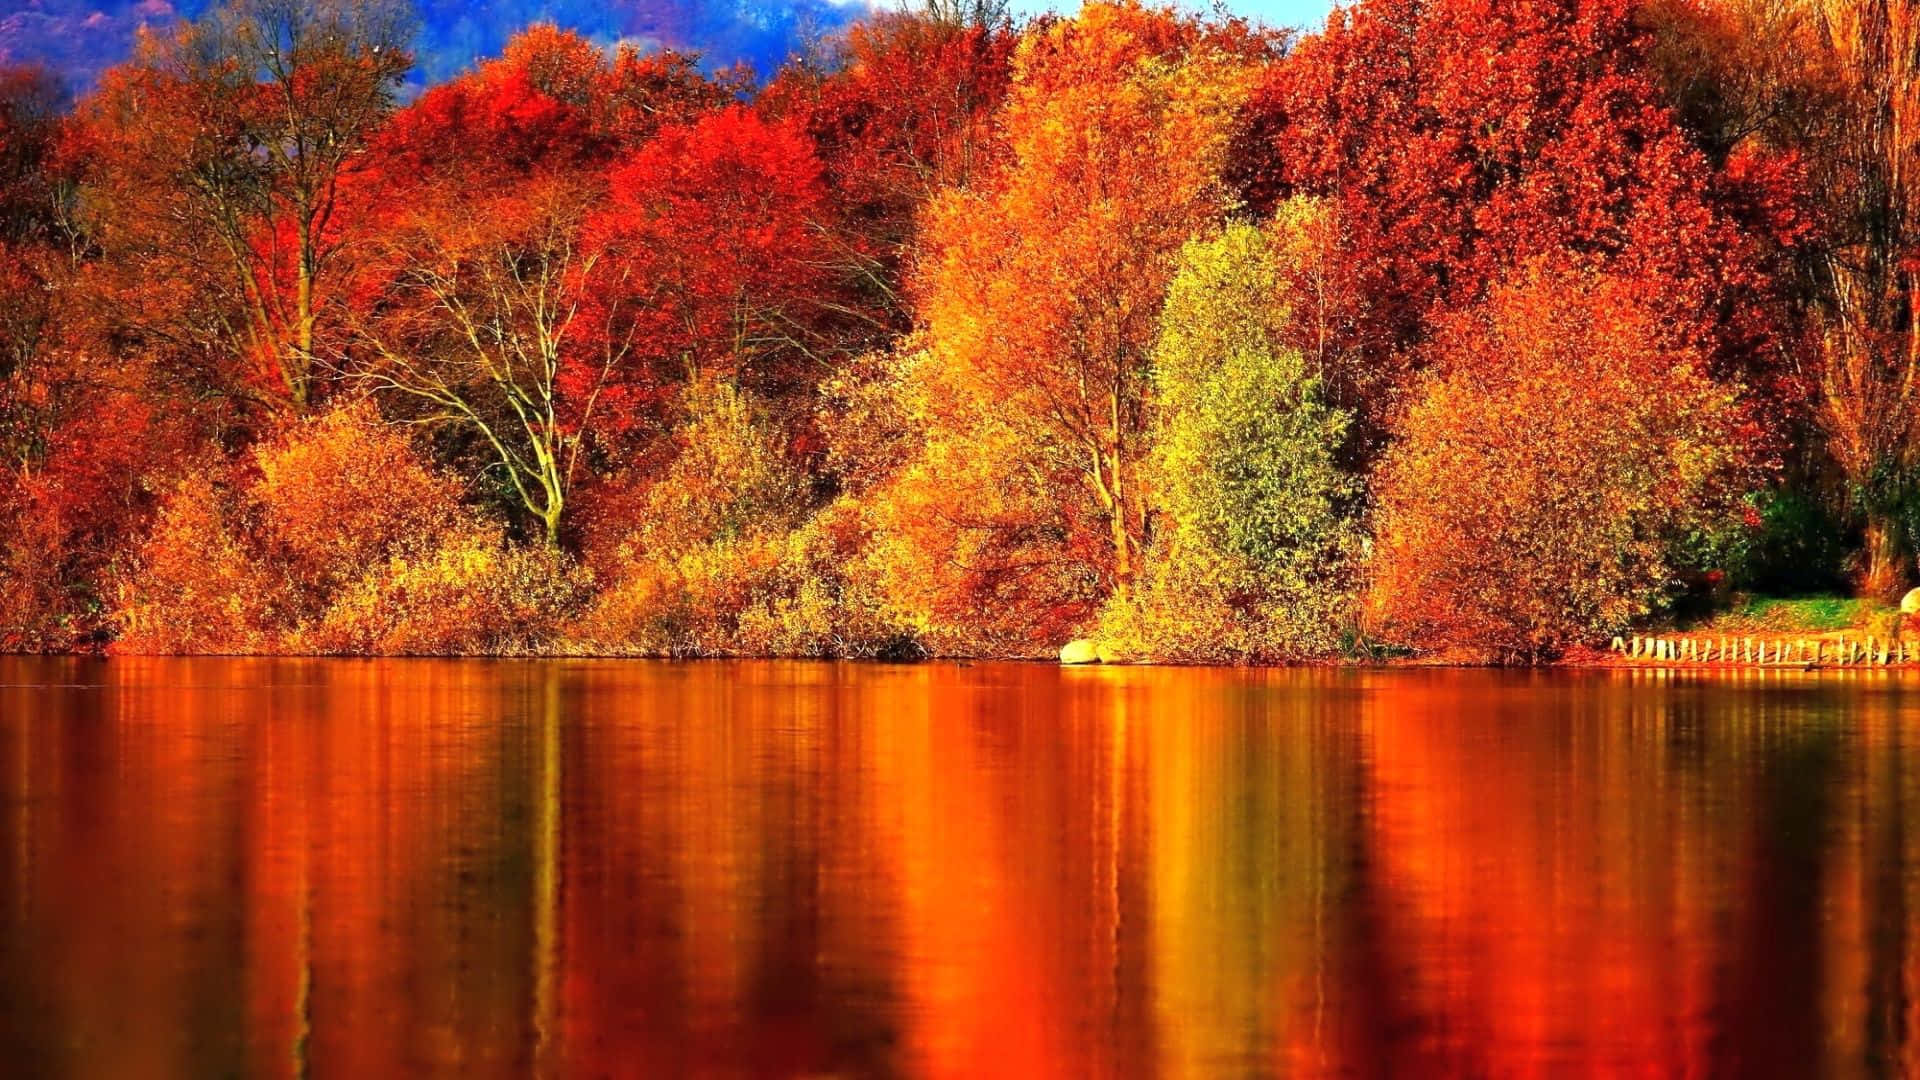 Enjoy the beauty of the fall season with trees turning vibrant shades of yellow and orange. Wallpaper